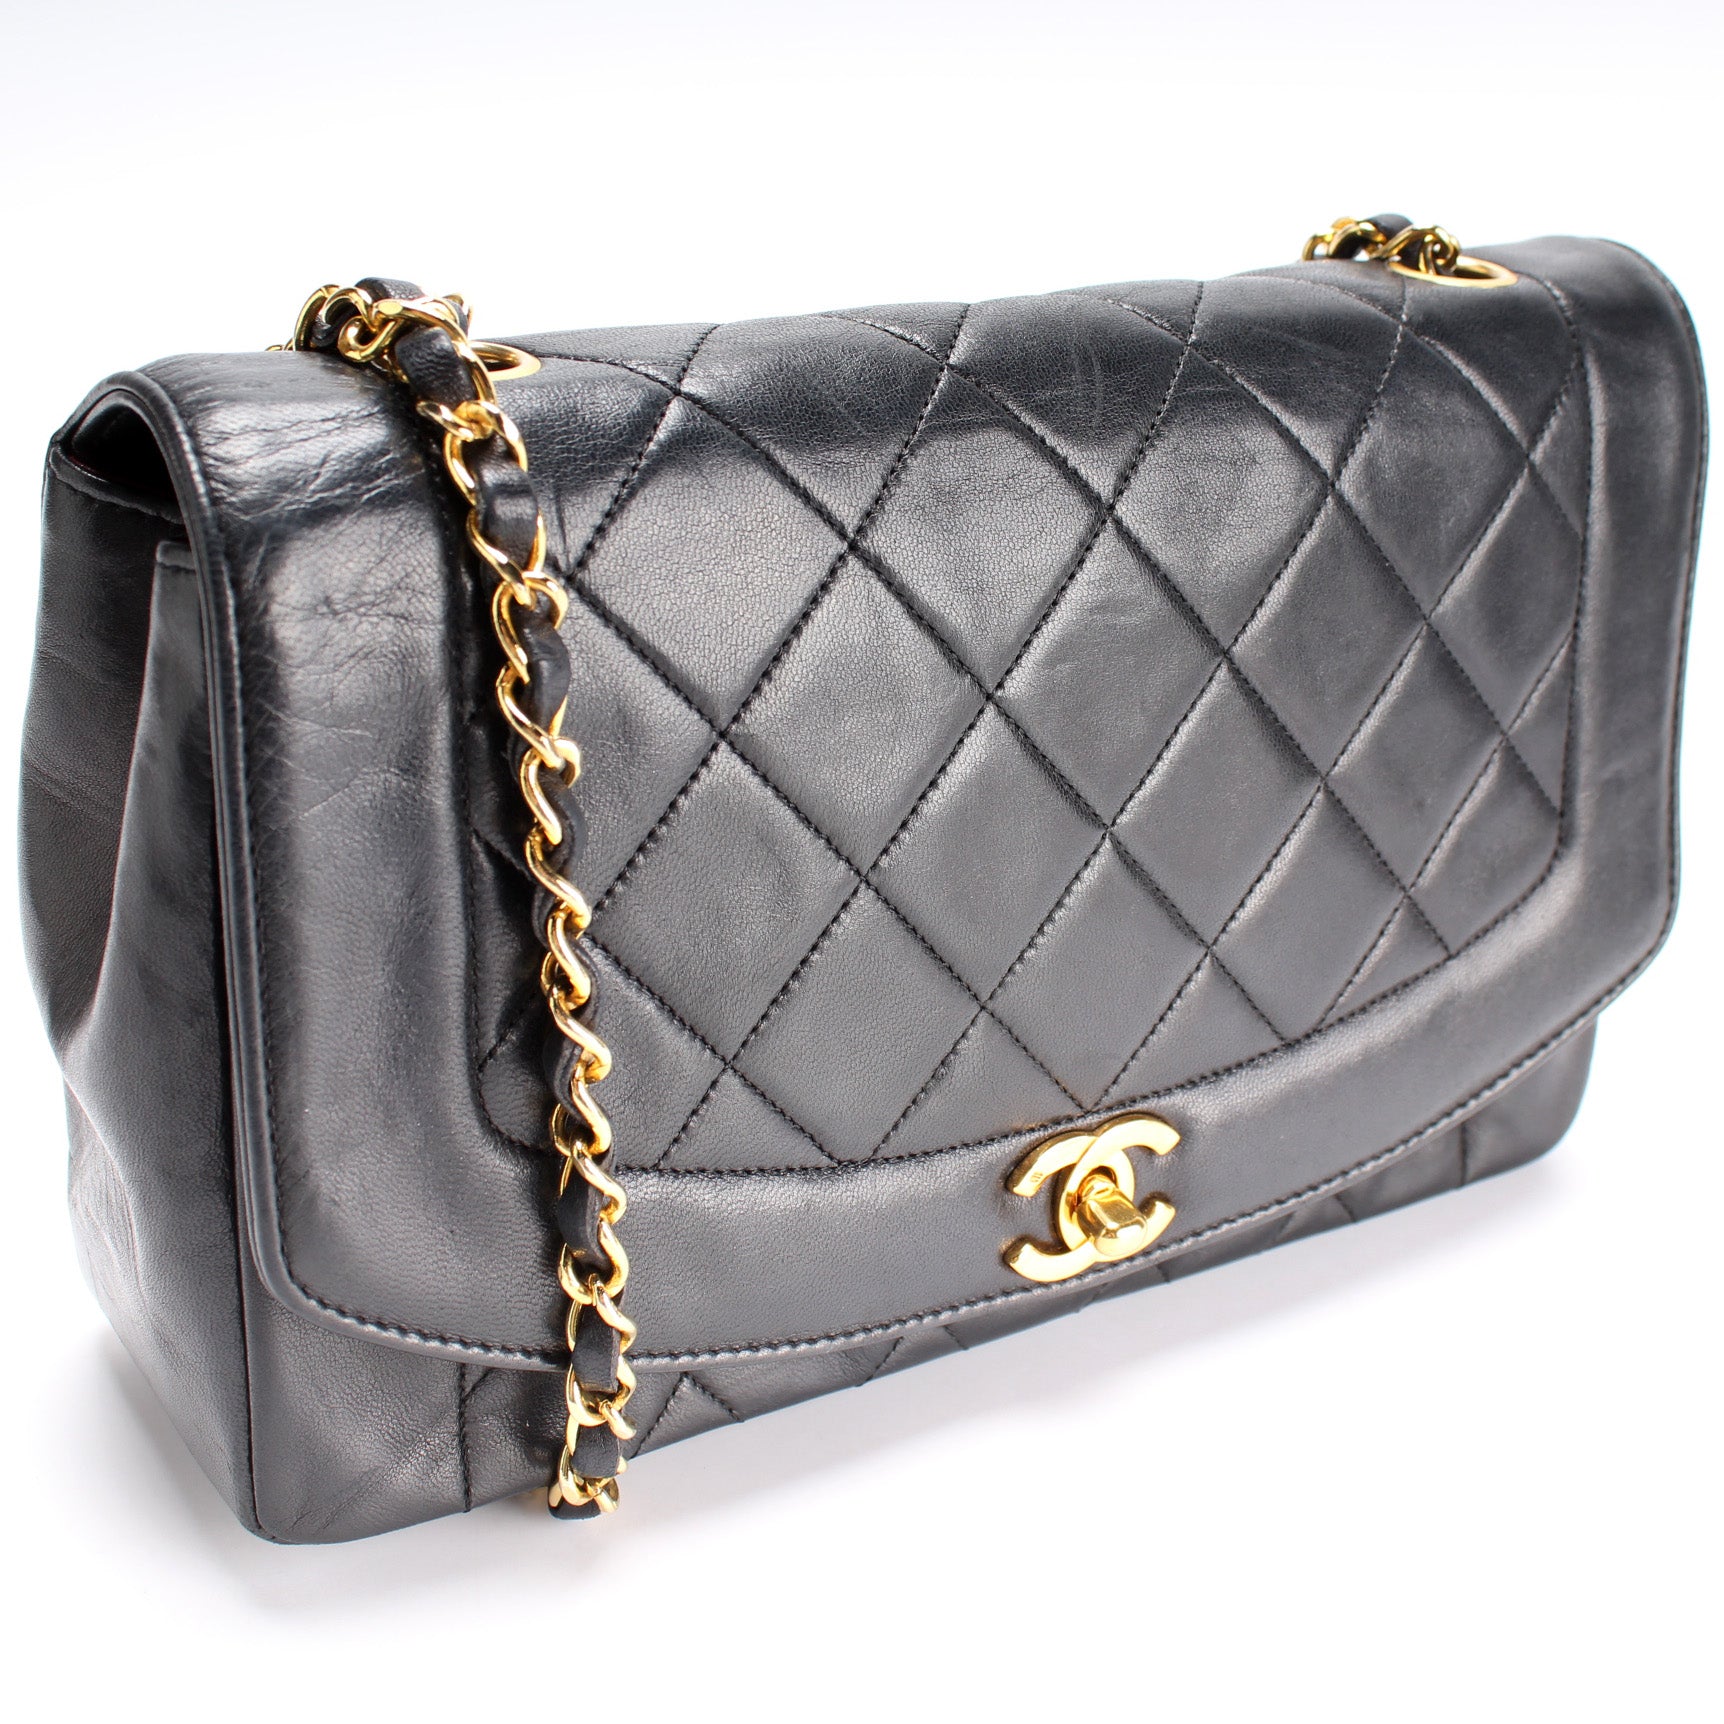 Designer Handbag Review - Chanel Small Lambskin Diana (and Purchasing  Experience)